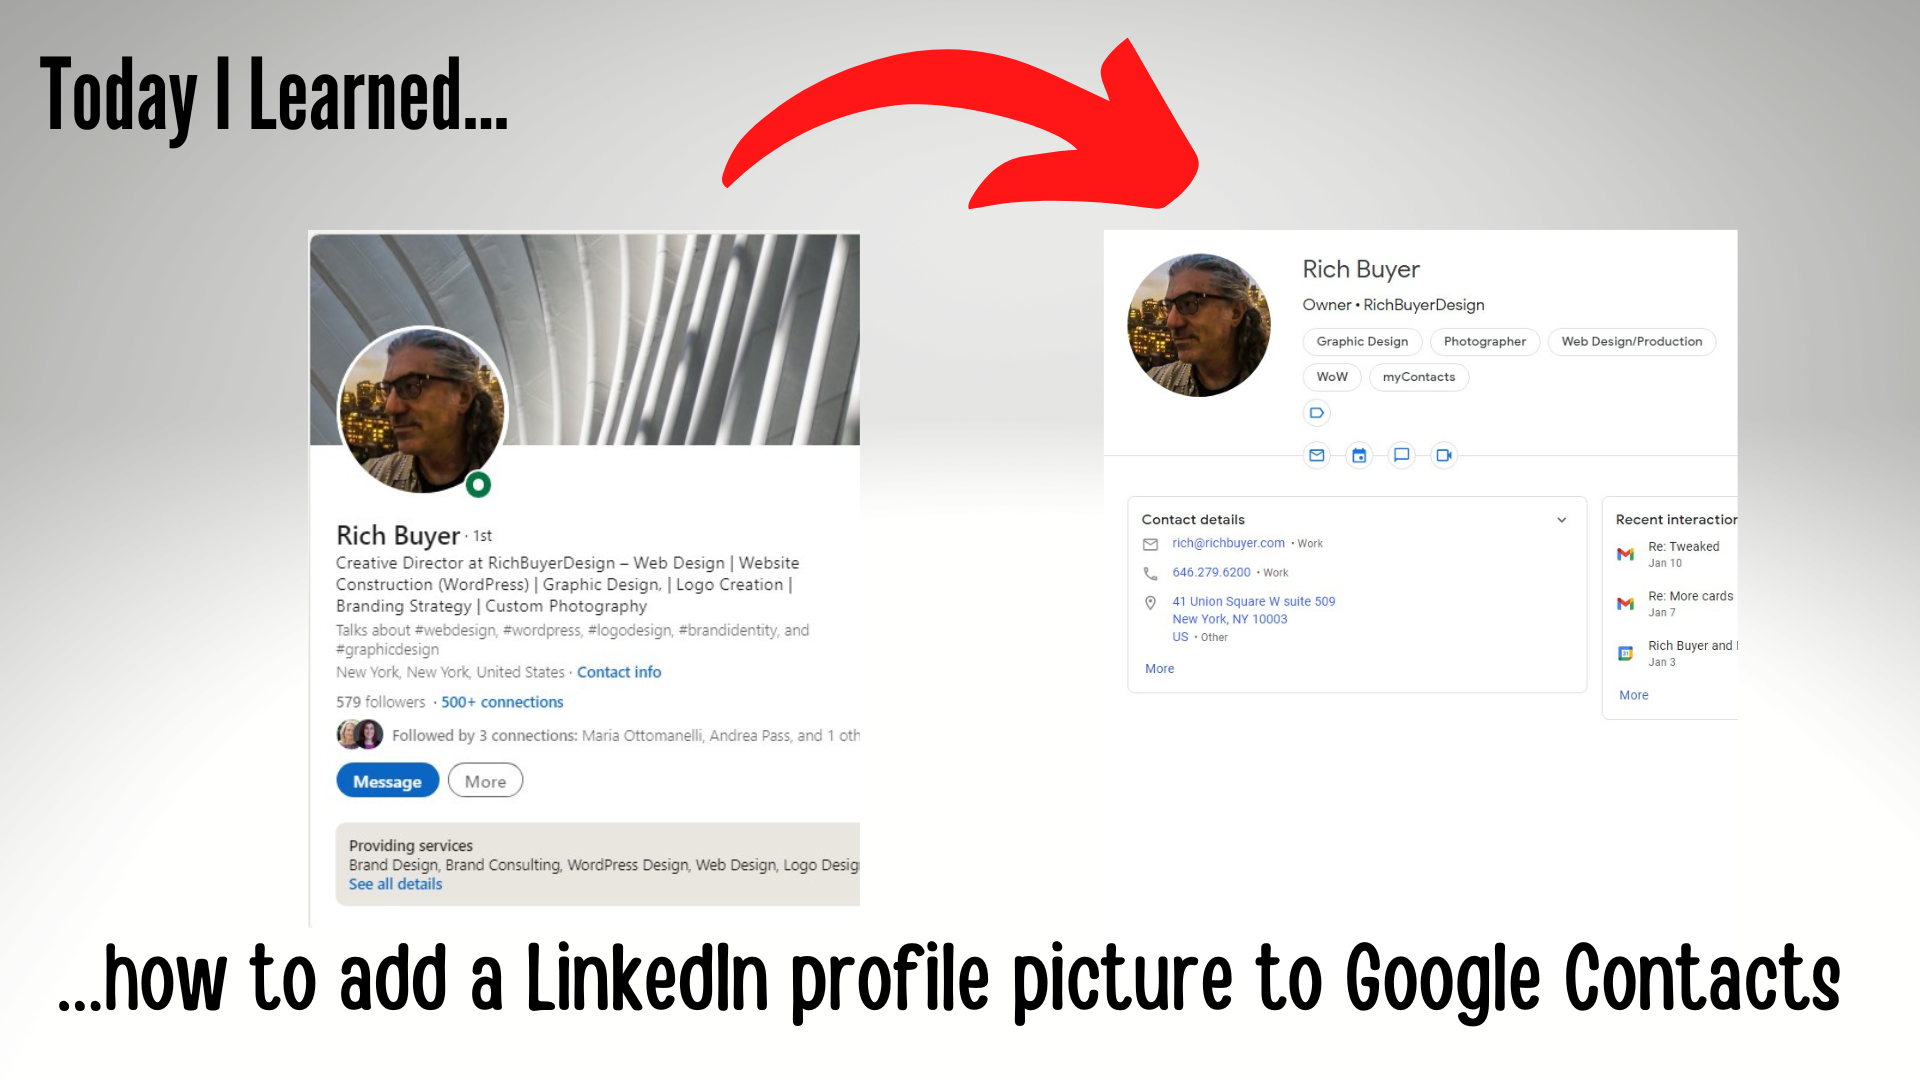 How to Add a LinkedIn Profile Picture to Google Contacts